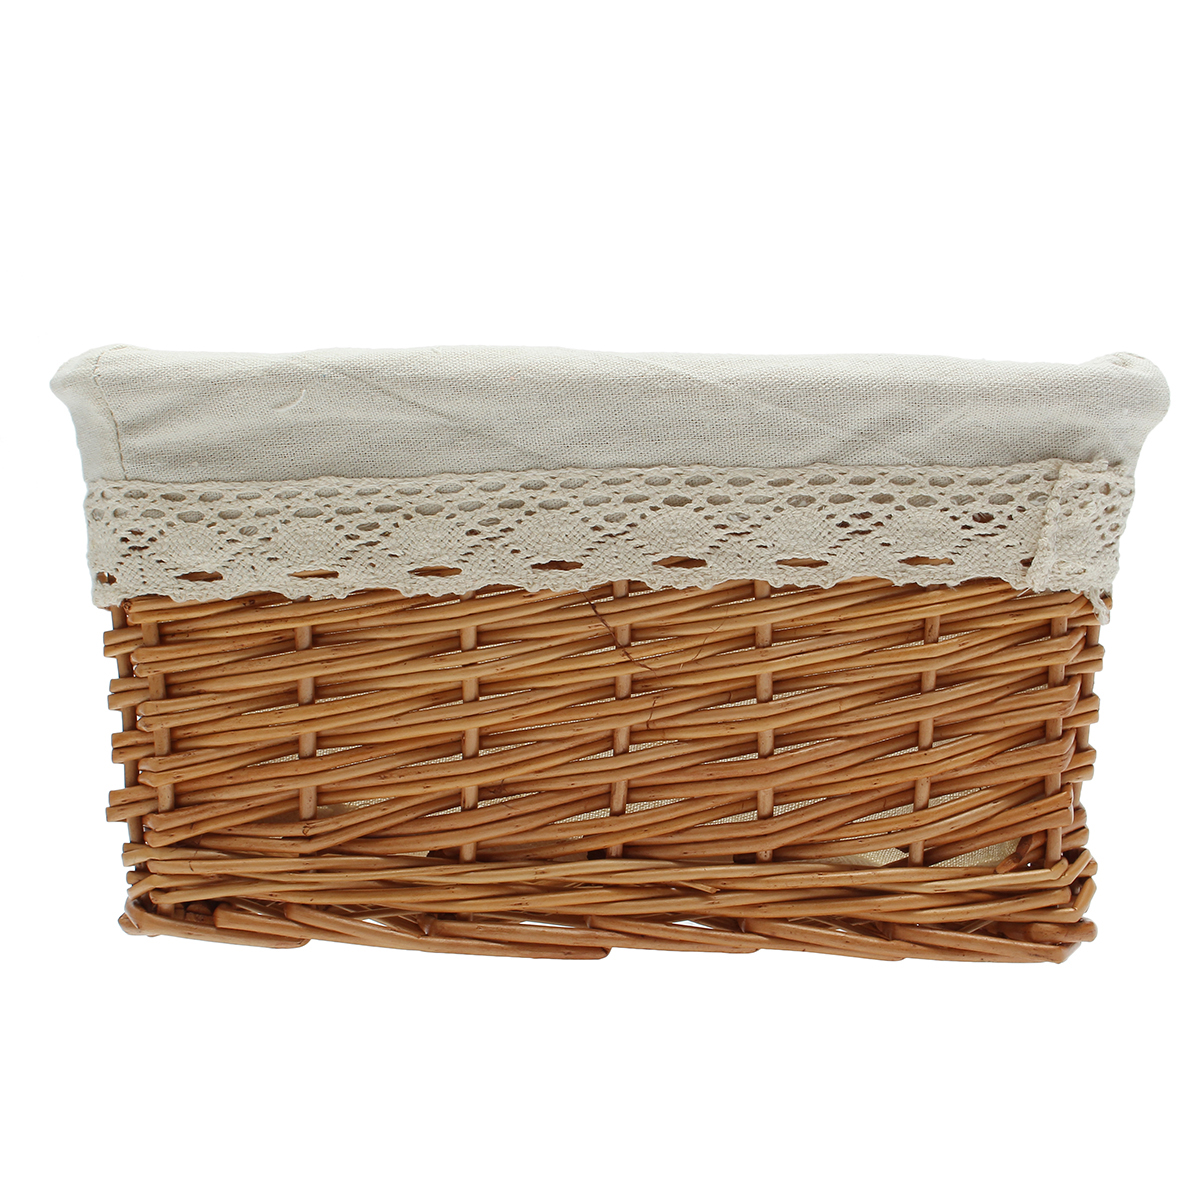 Multipurpose Rectangular Wicker Storage Basket with Removable Washable Liner Willow Woven Containers